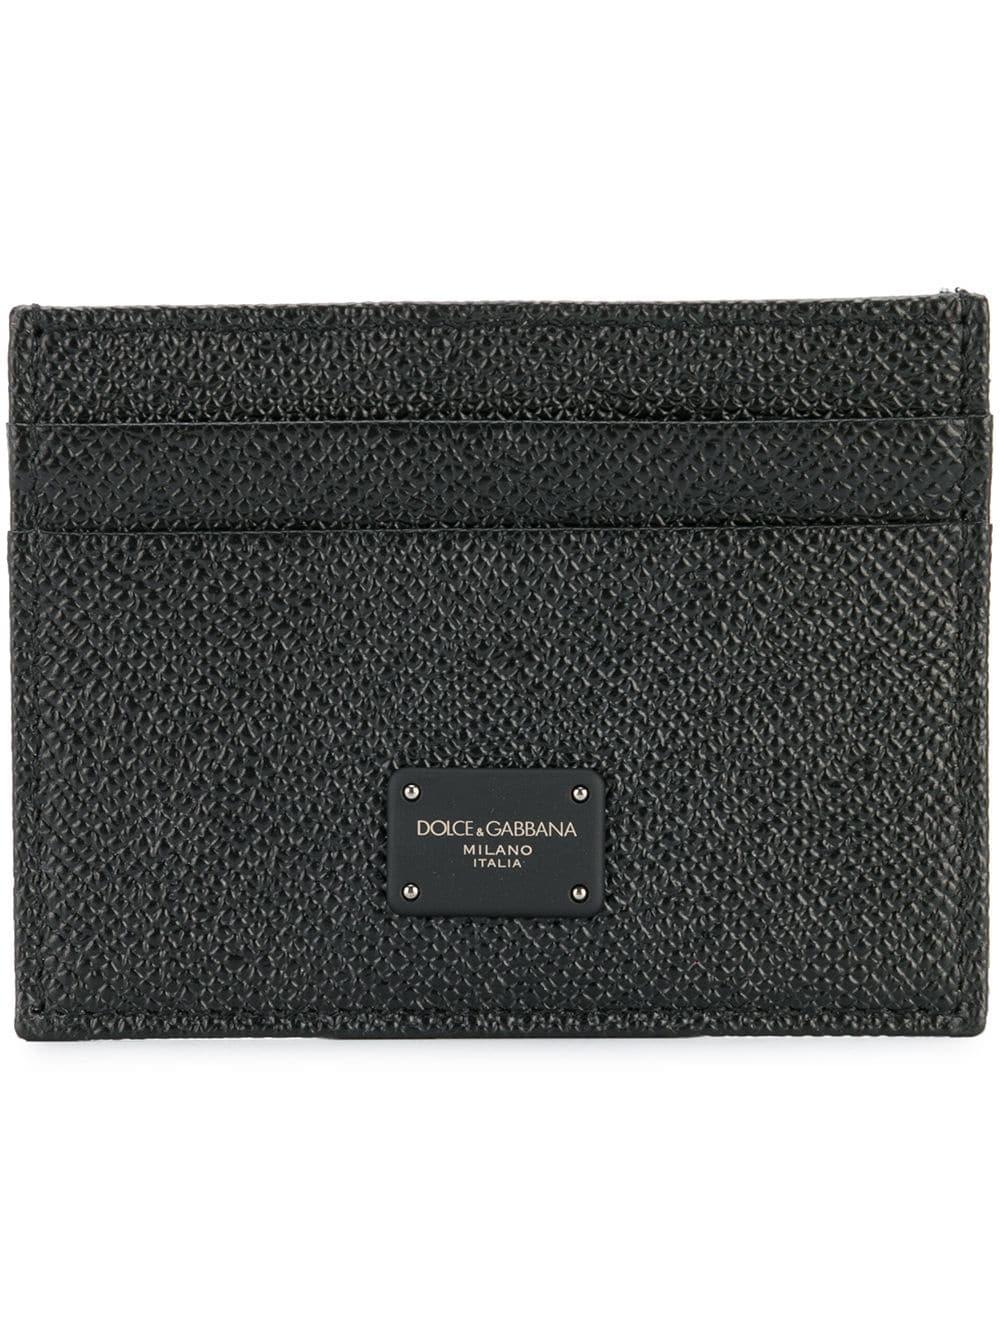 Dolce & Gabbana Flat Pebbled Leather Card Case in Black for Men | Lyst